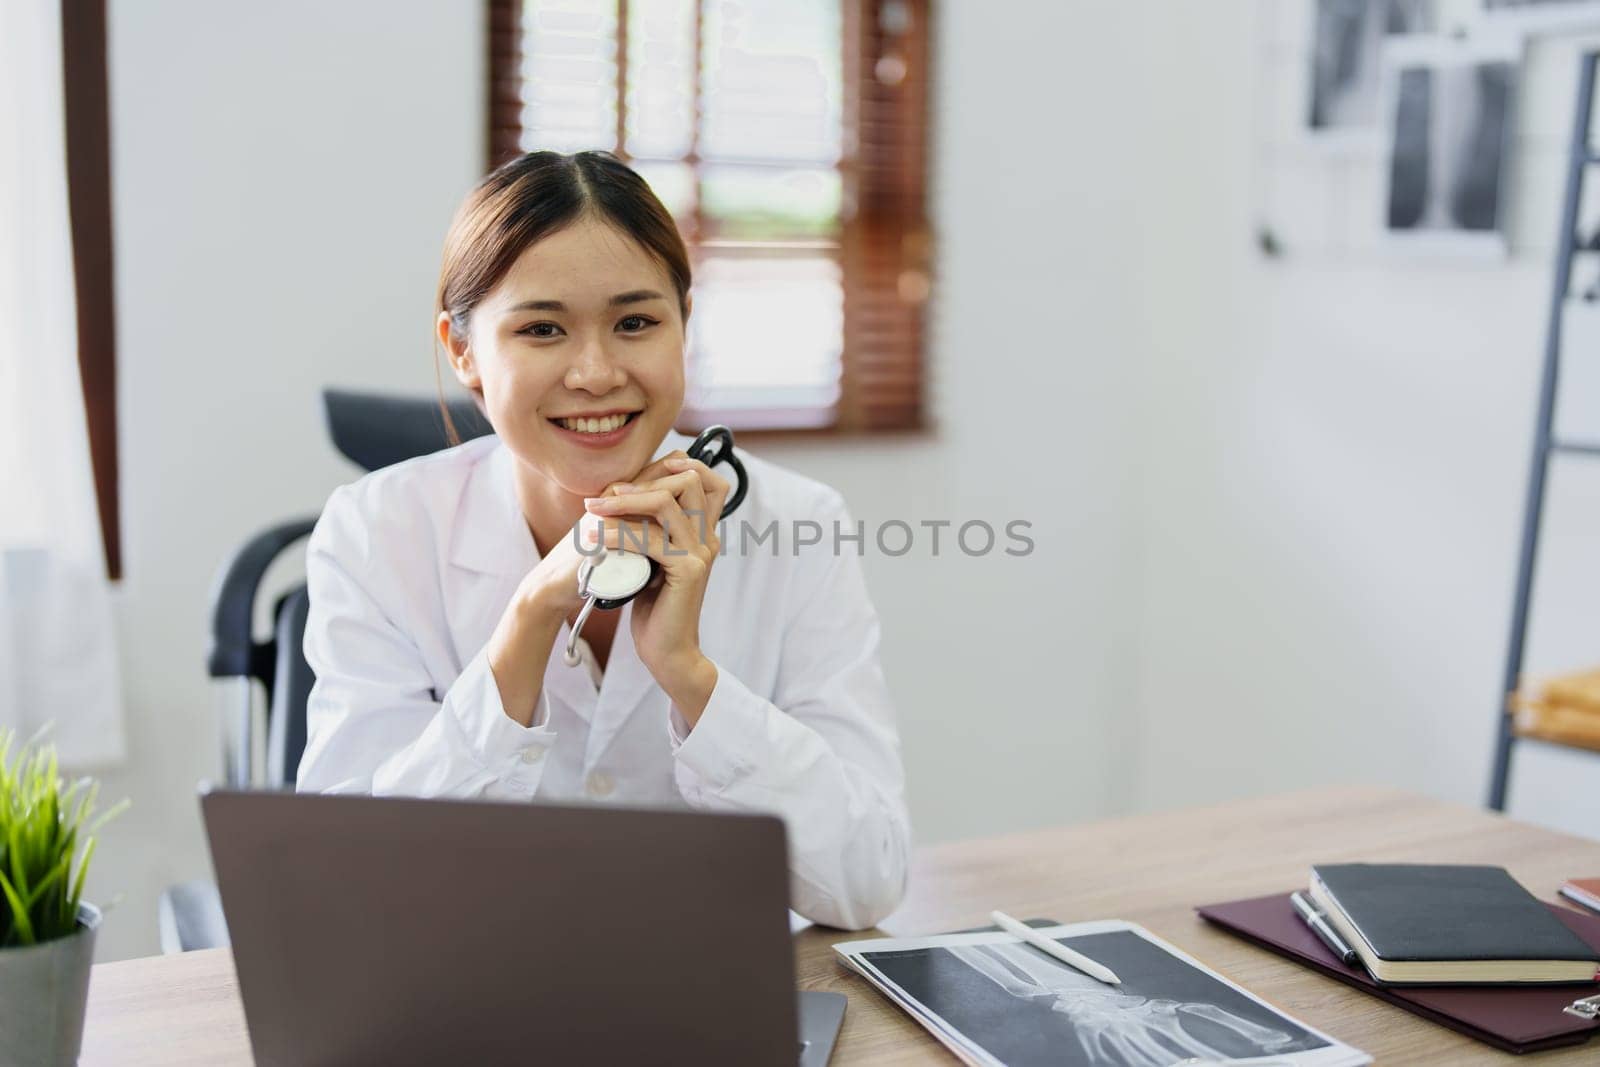 Portrait of an Asian doctor using a computer.